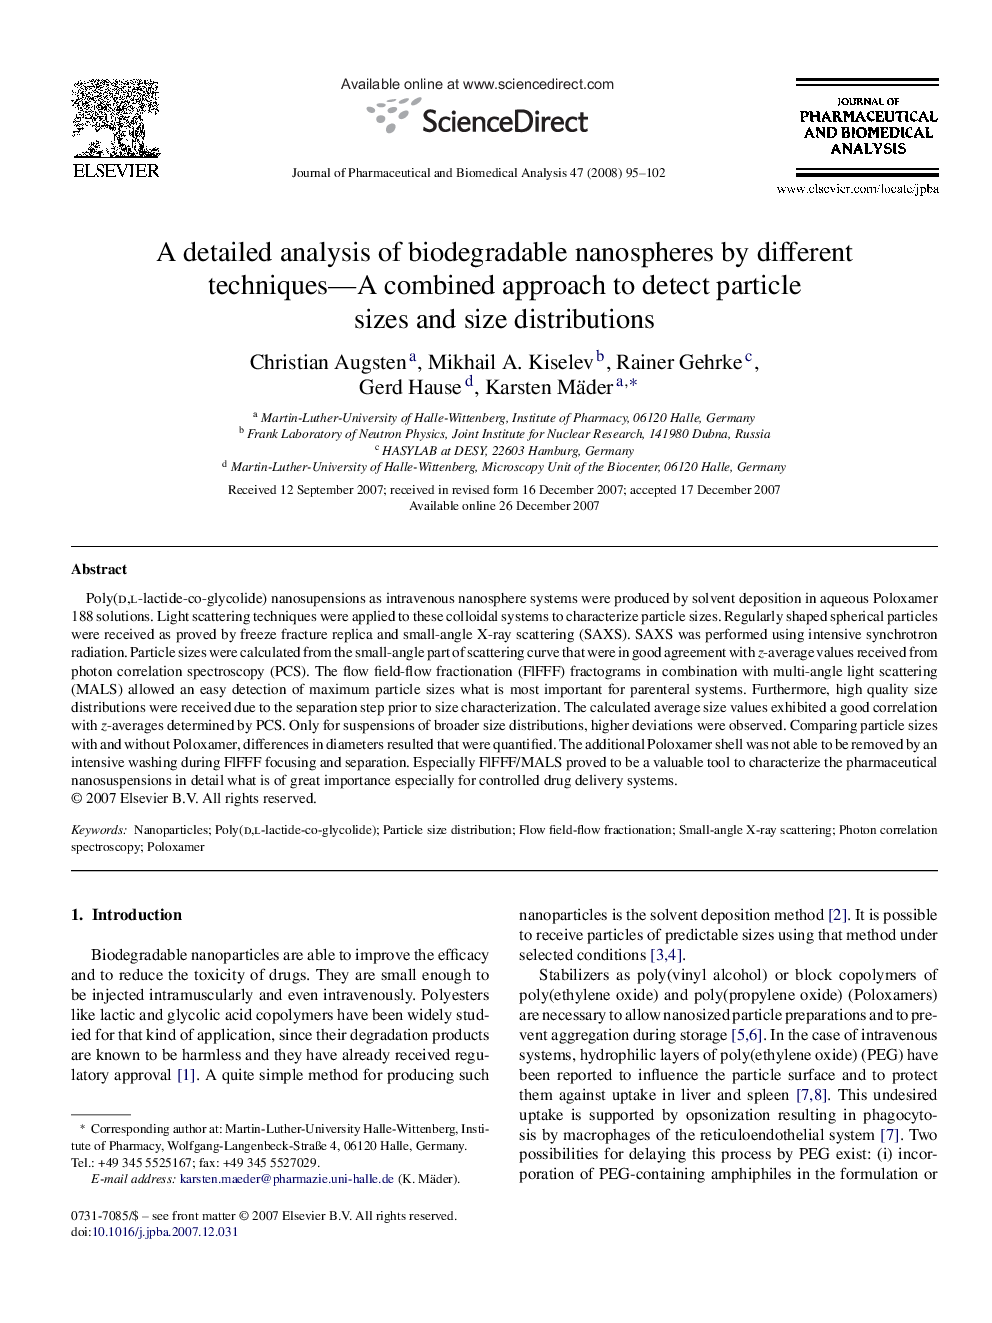 A detailed analysis of biodegradable nanospheres by different techniques—A combined approach to detect particle sizes and size distributions